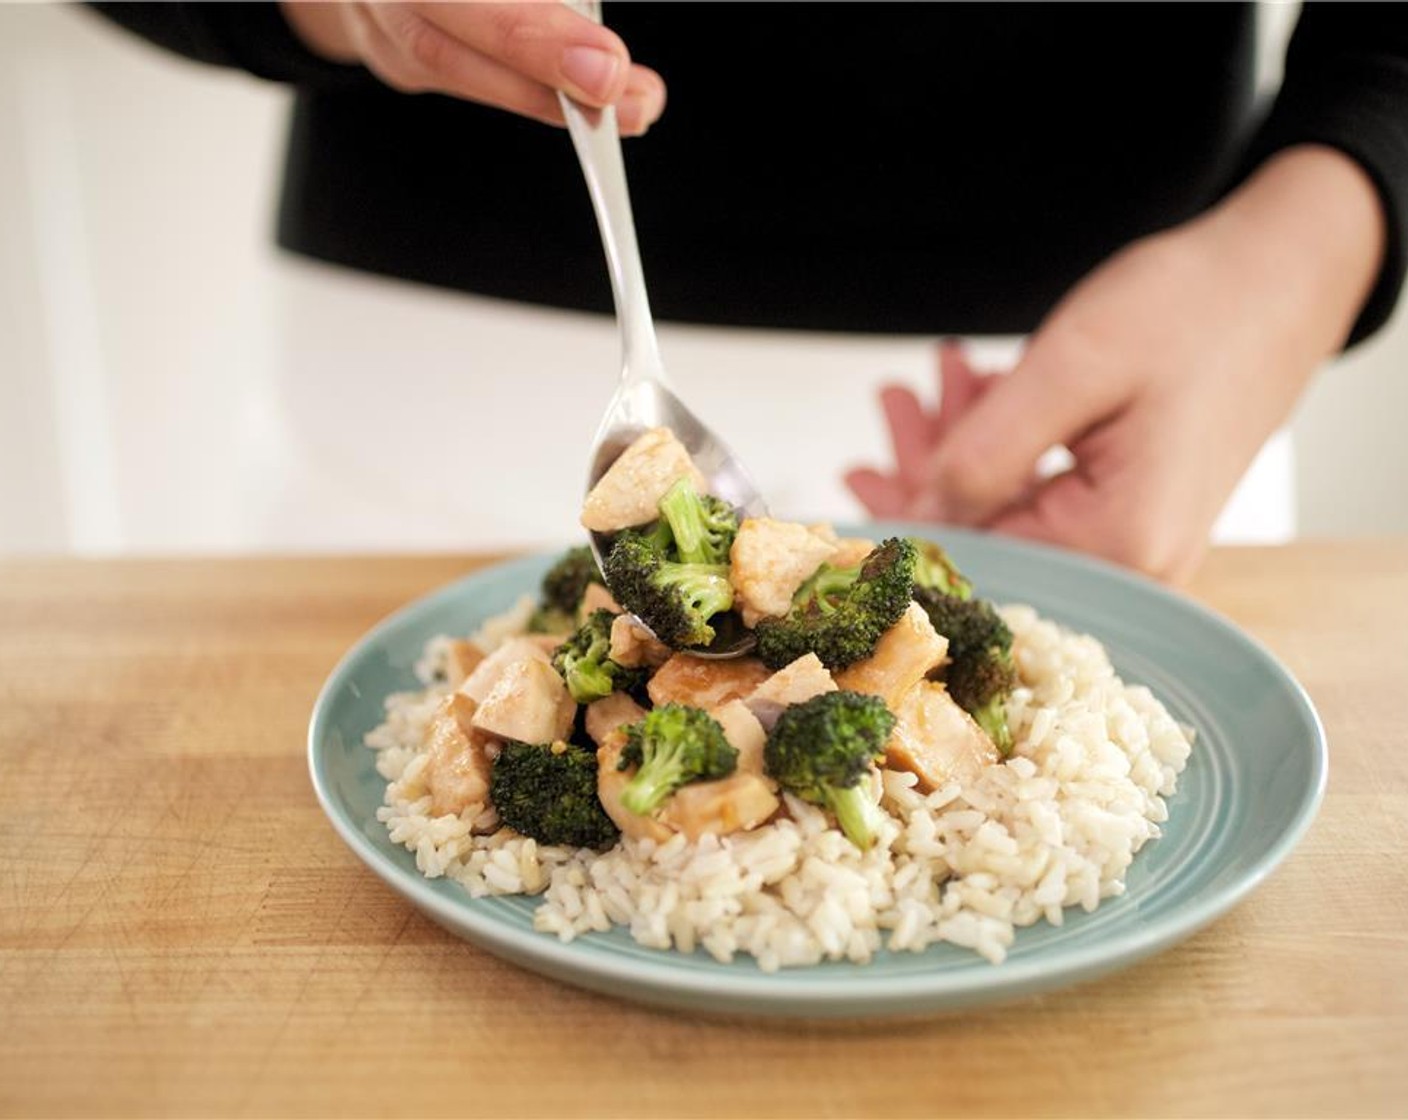 step 14 Divide the rice between two plates and place chicken and broccoli over the rice.